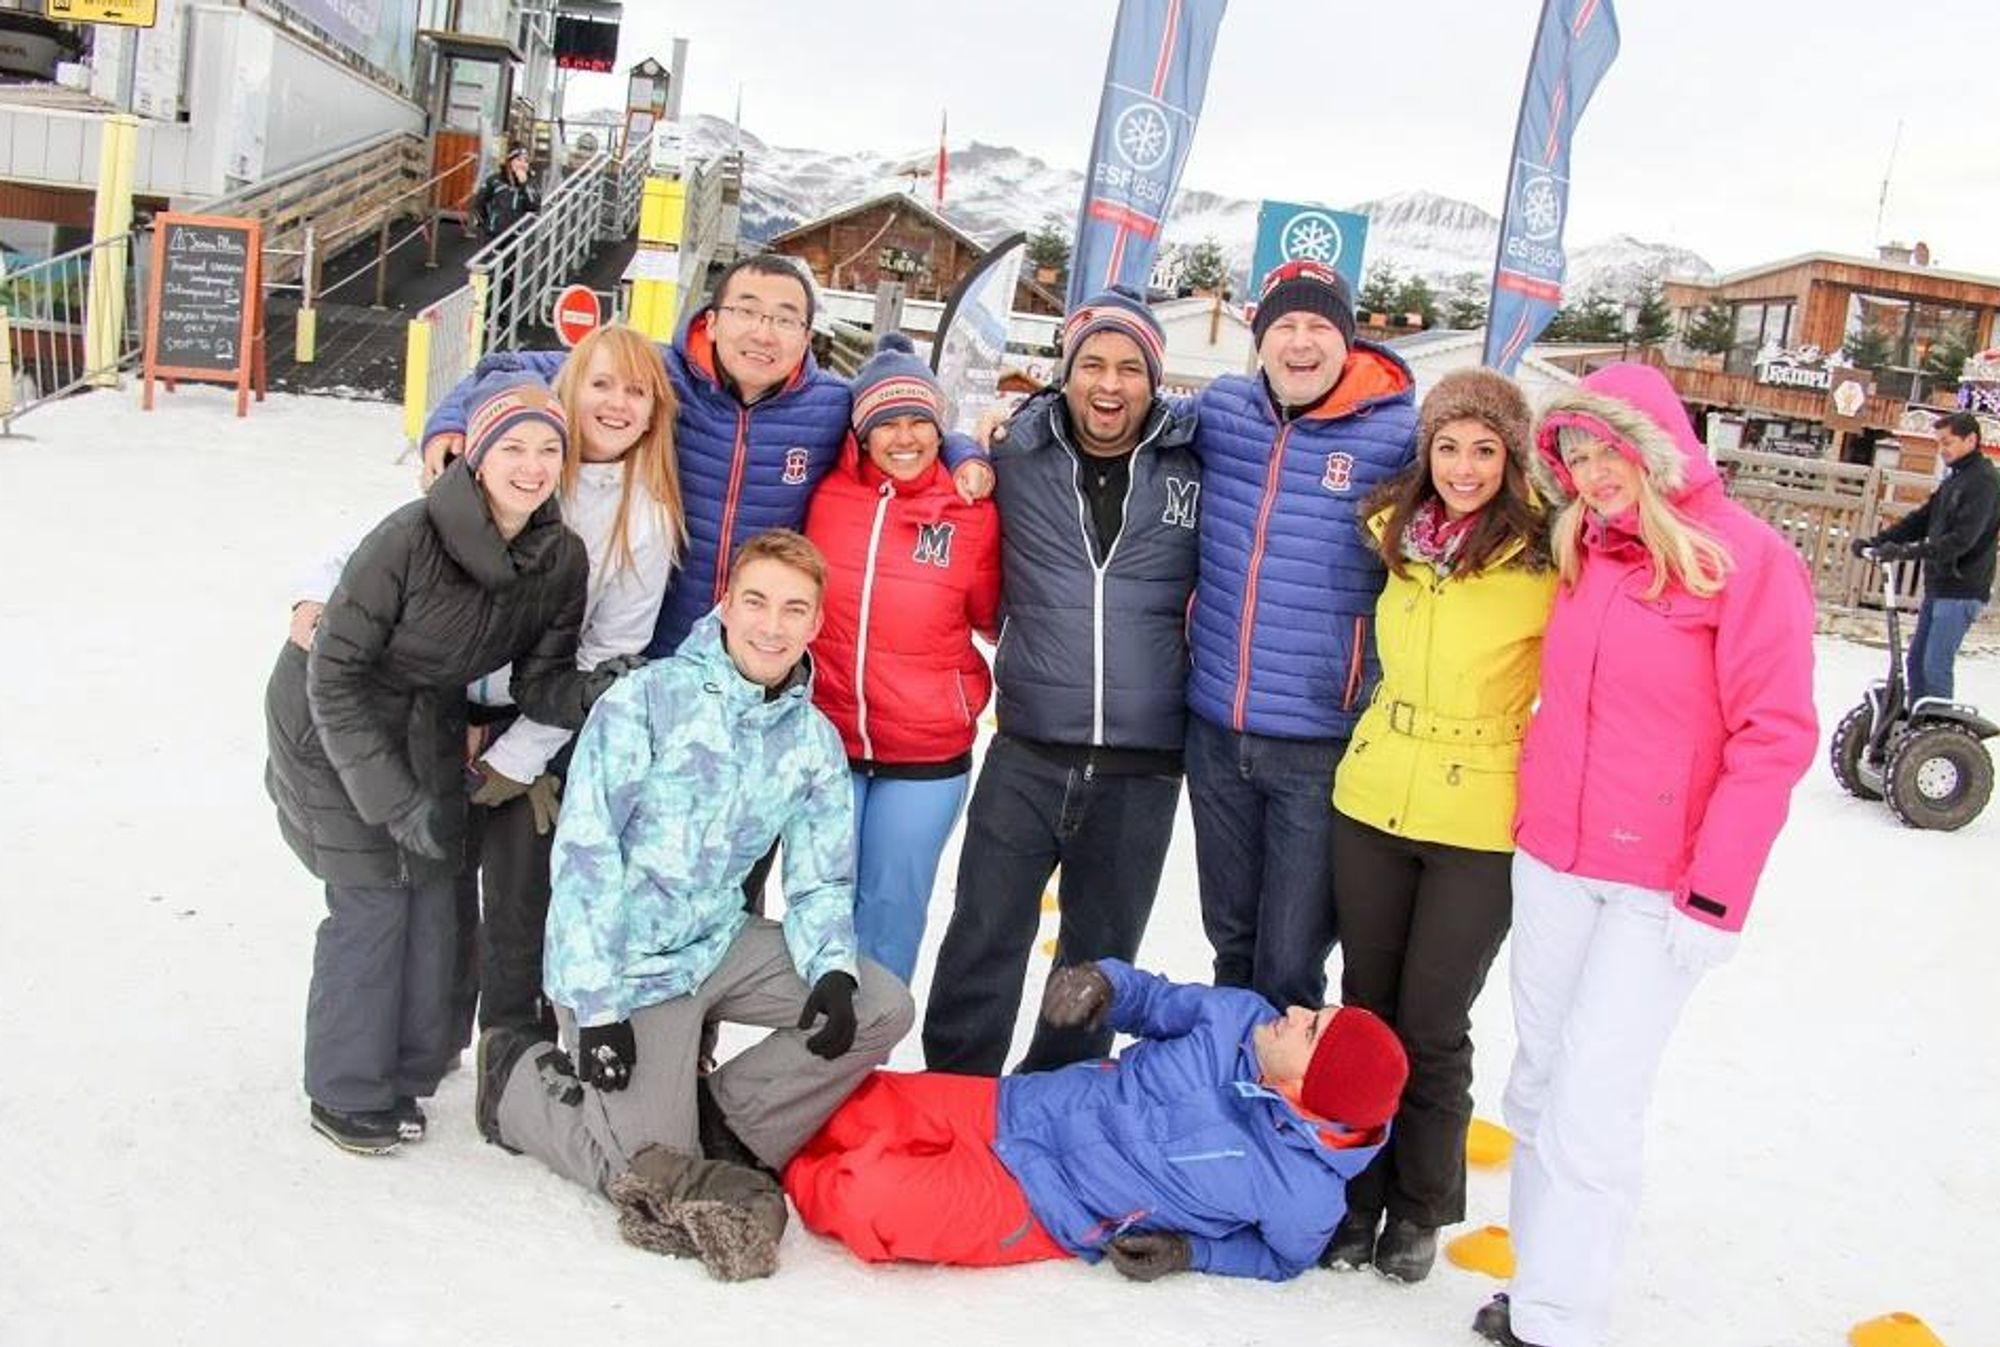 Après-ski activities and entertainment offerings